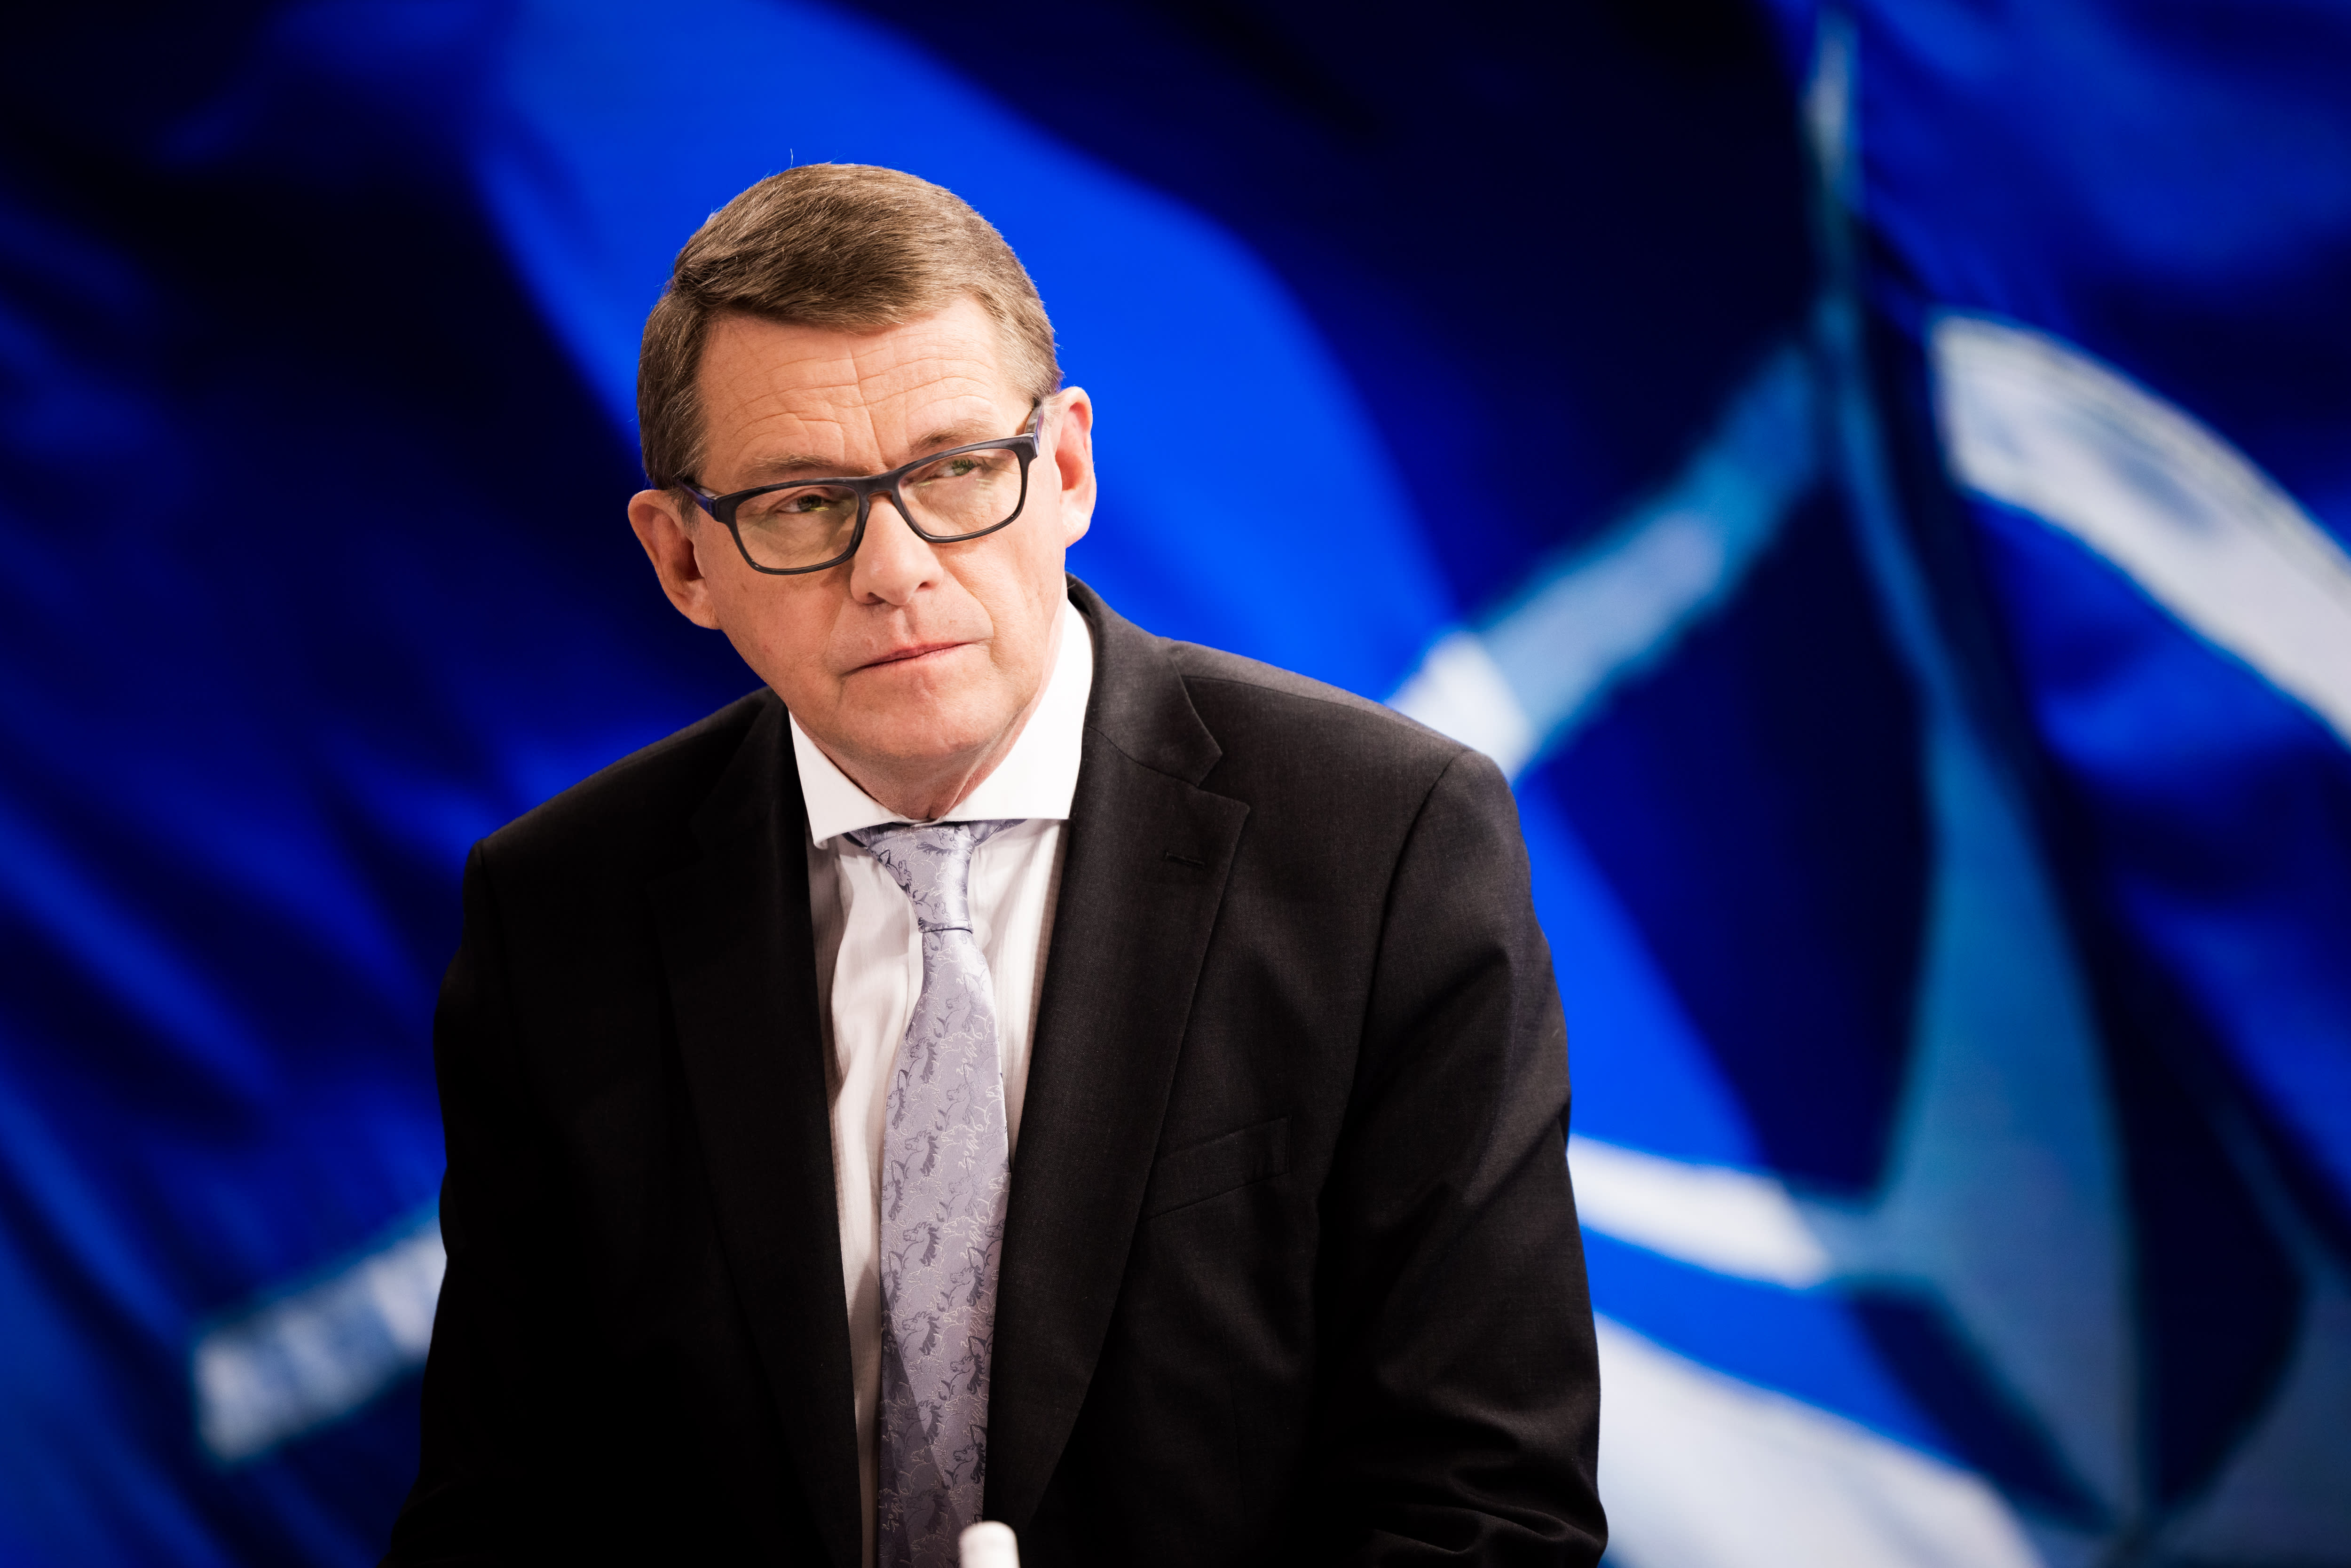 Vanhanen: Finland’s NATO membership would increase stability in the Baltic Sea region